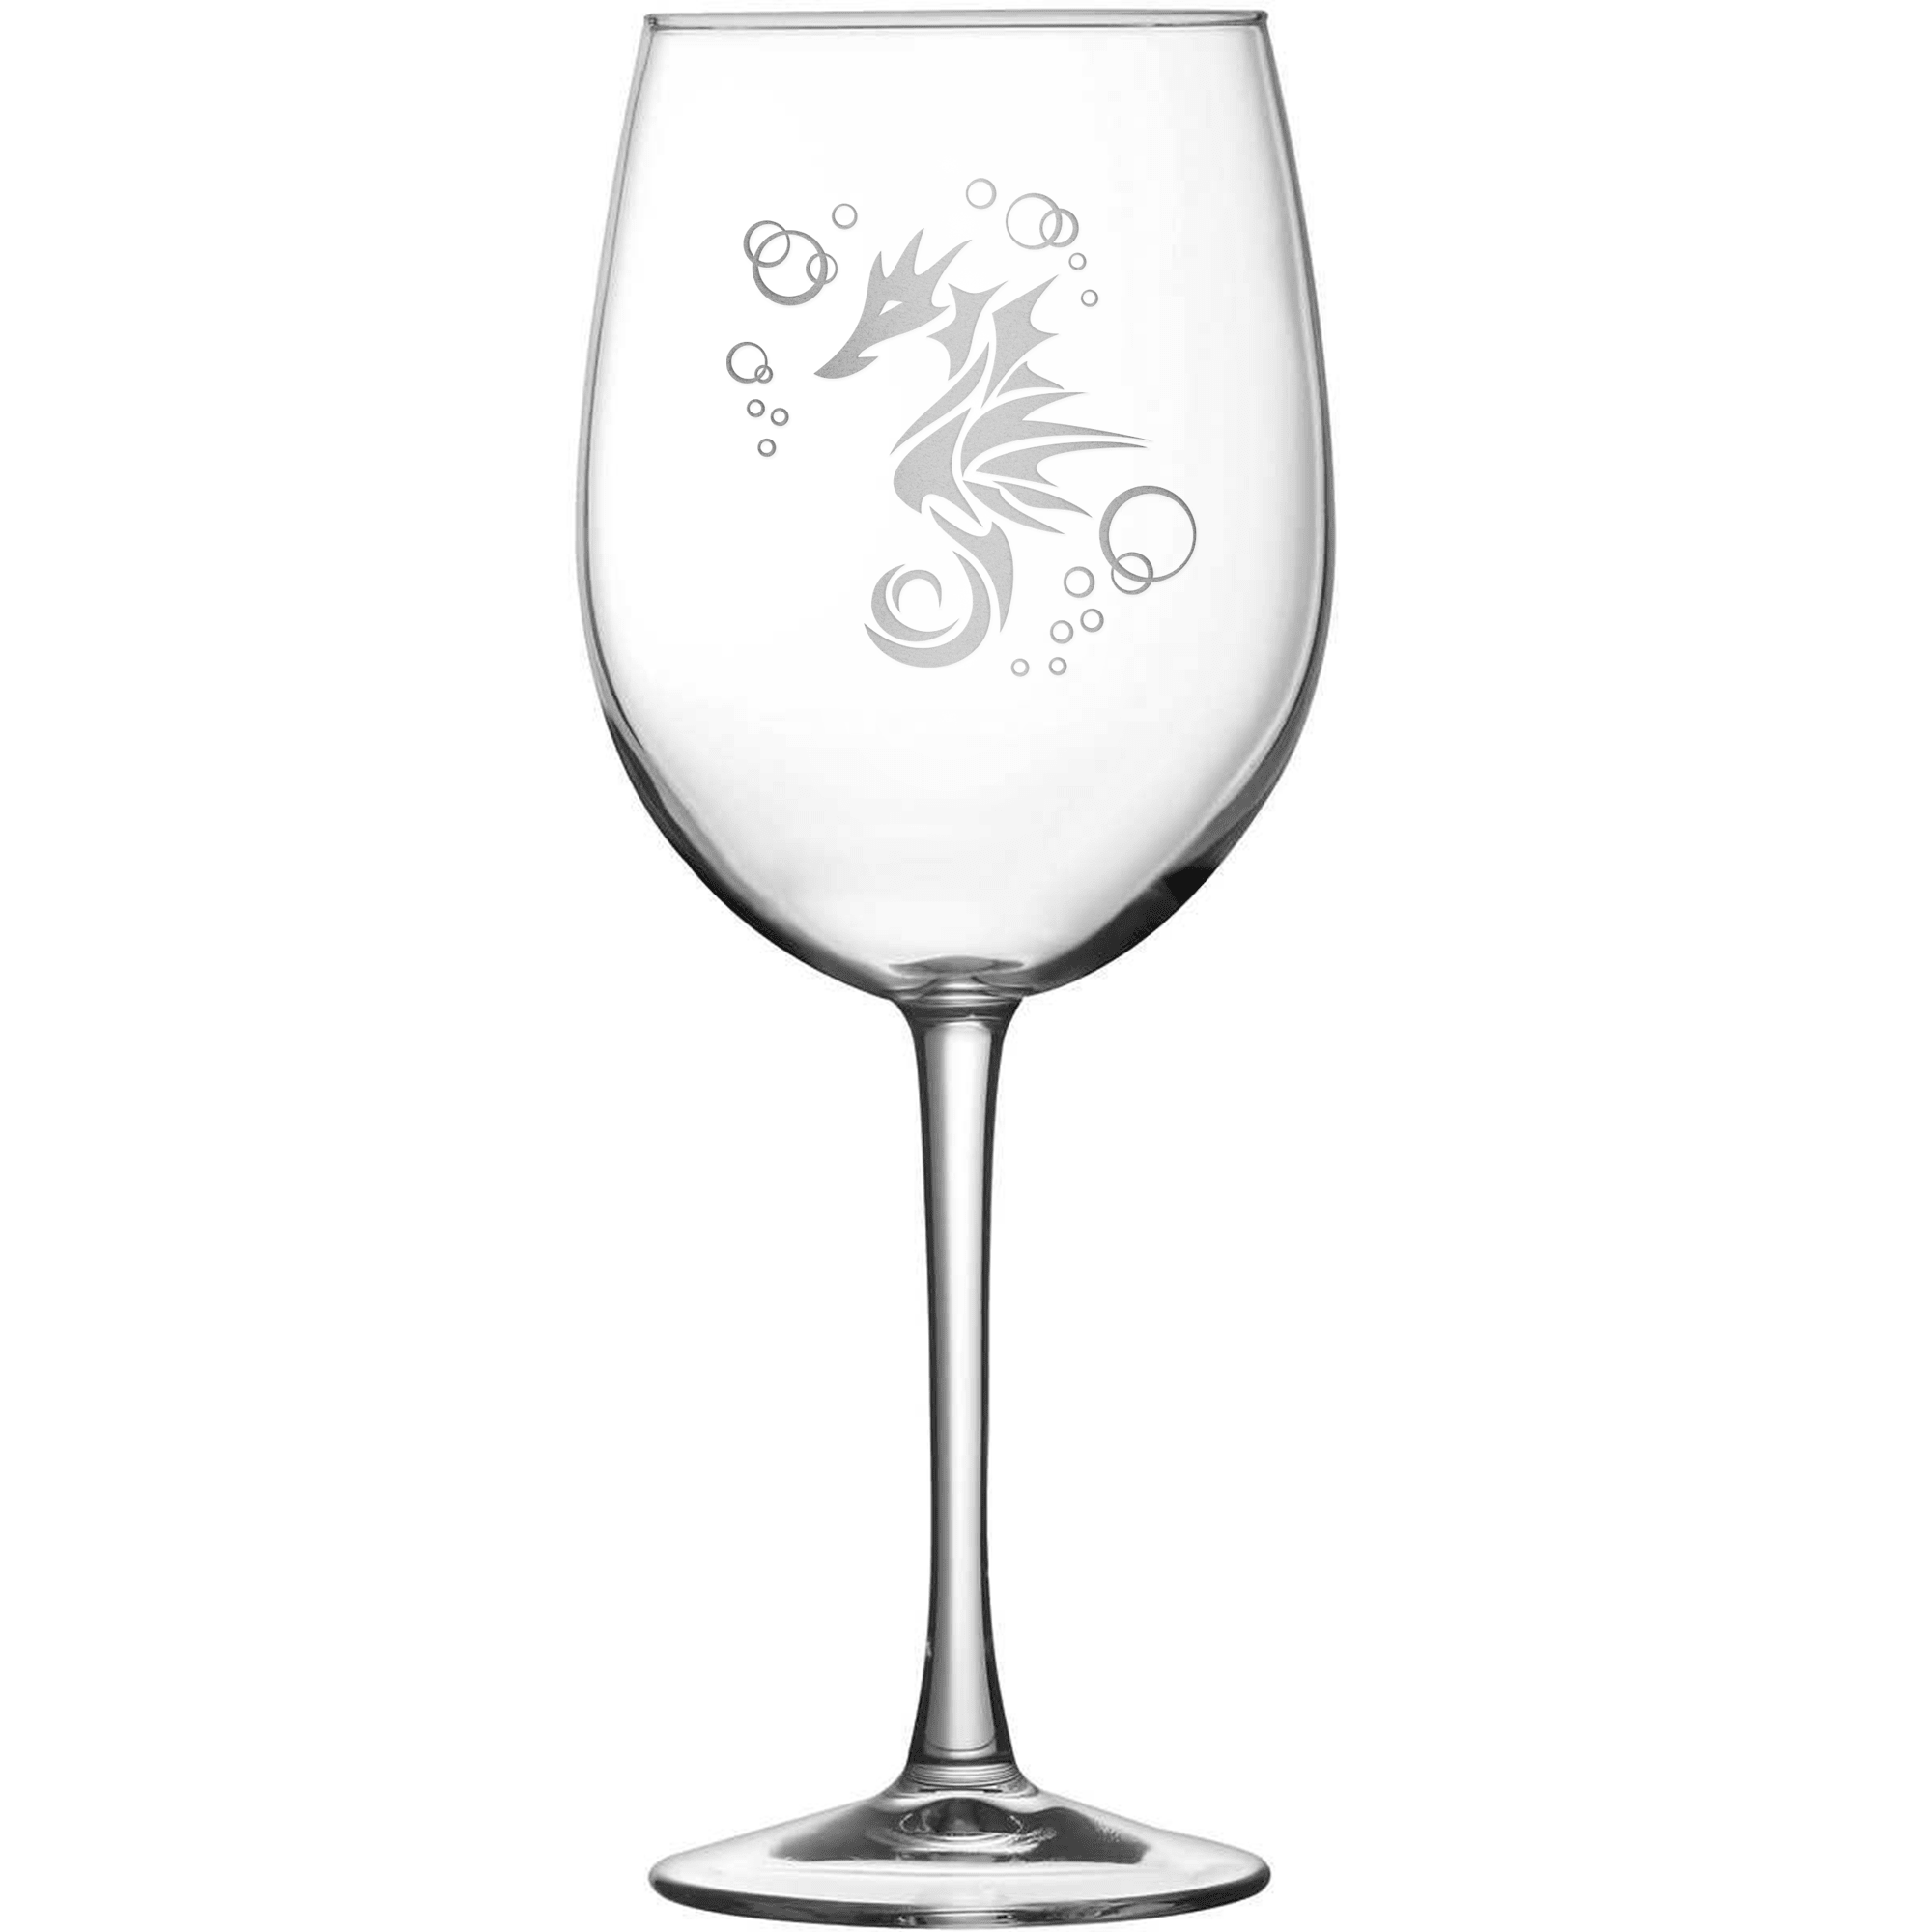 Tulip Wine Glass with Seahorse Design, Hand Etched by Integrity Bottles